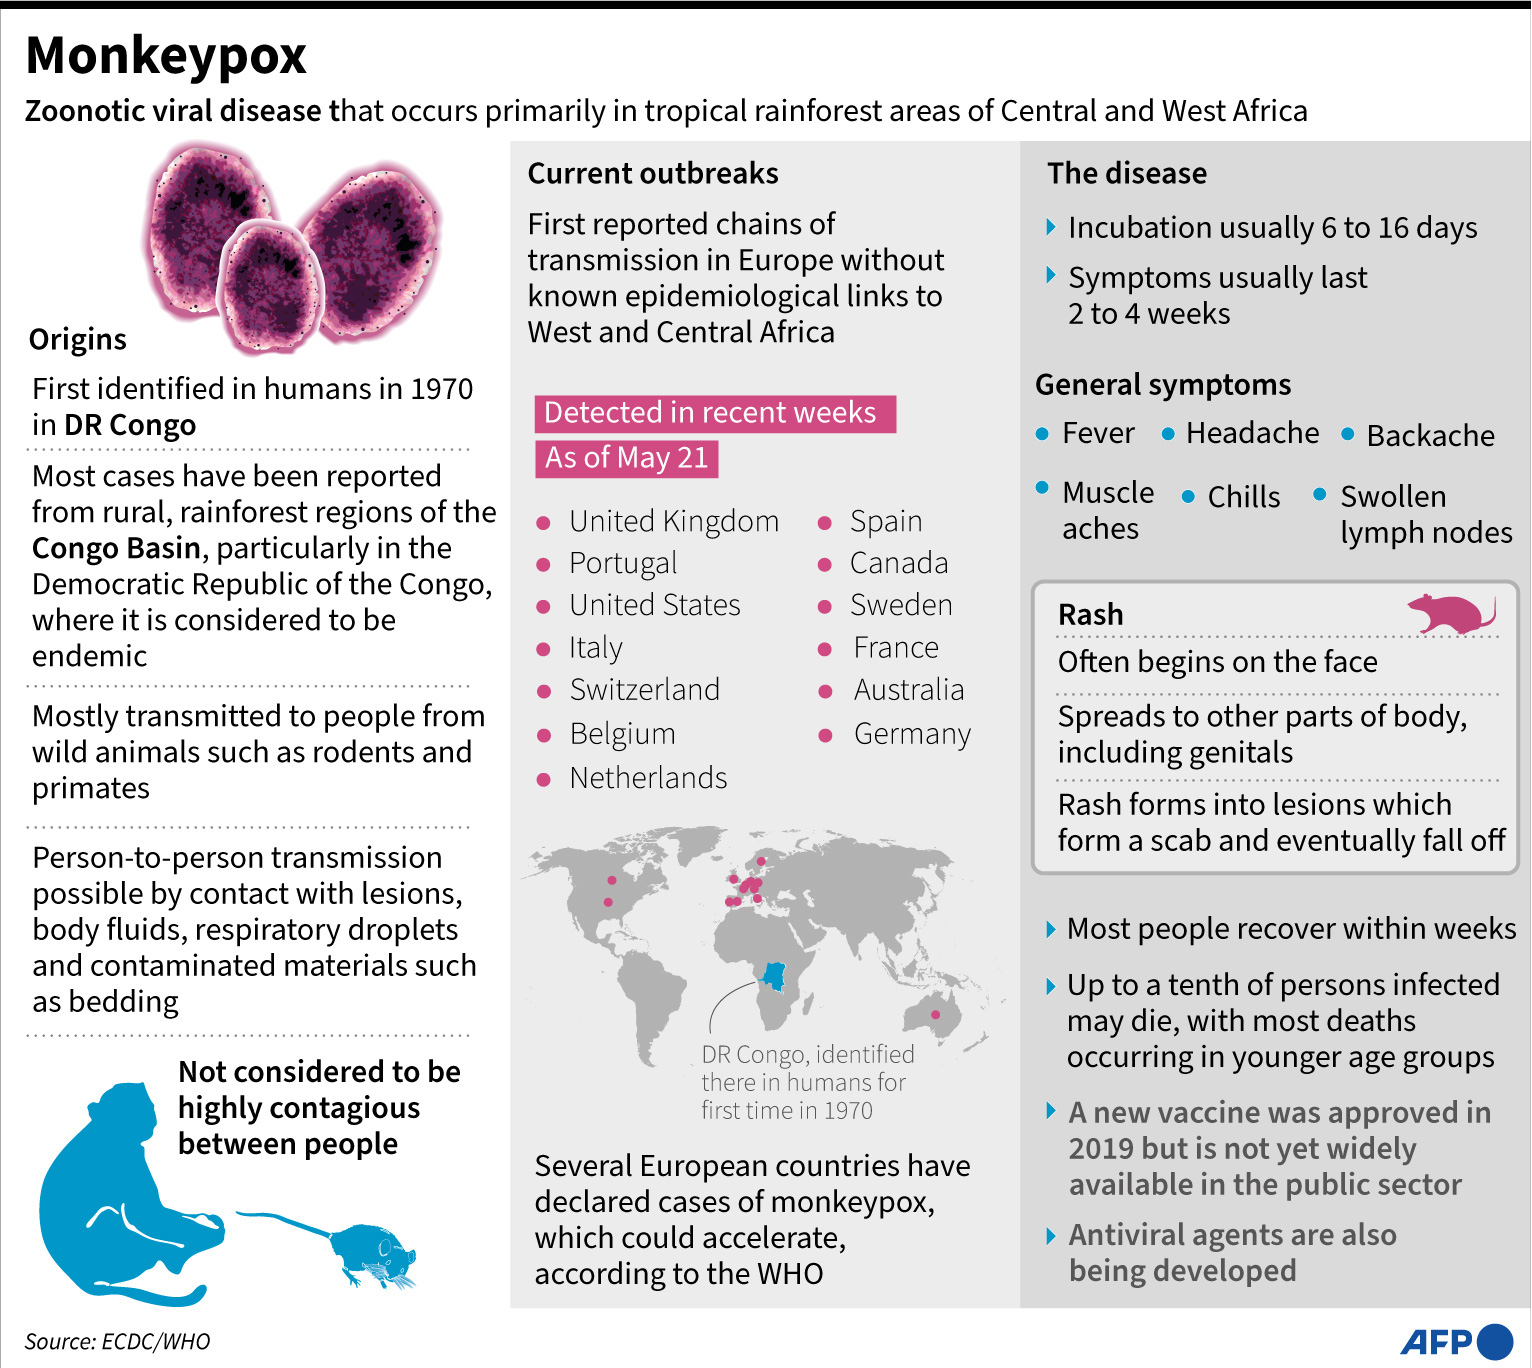 The virus is transmitted to humans from animals, with symptoms very similar to smallpox but less severe. -AFP